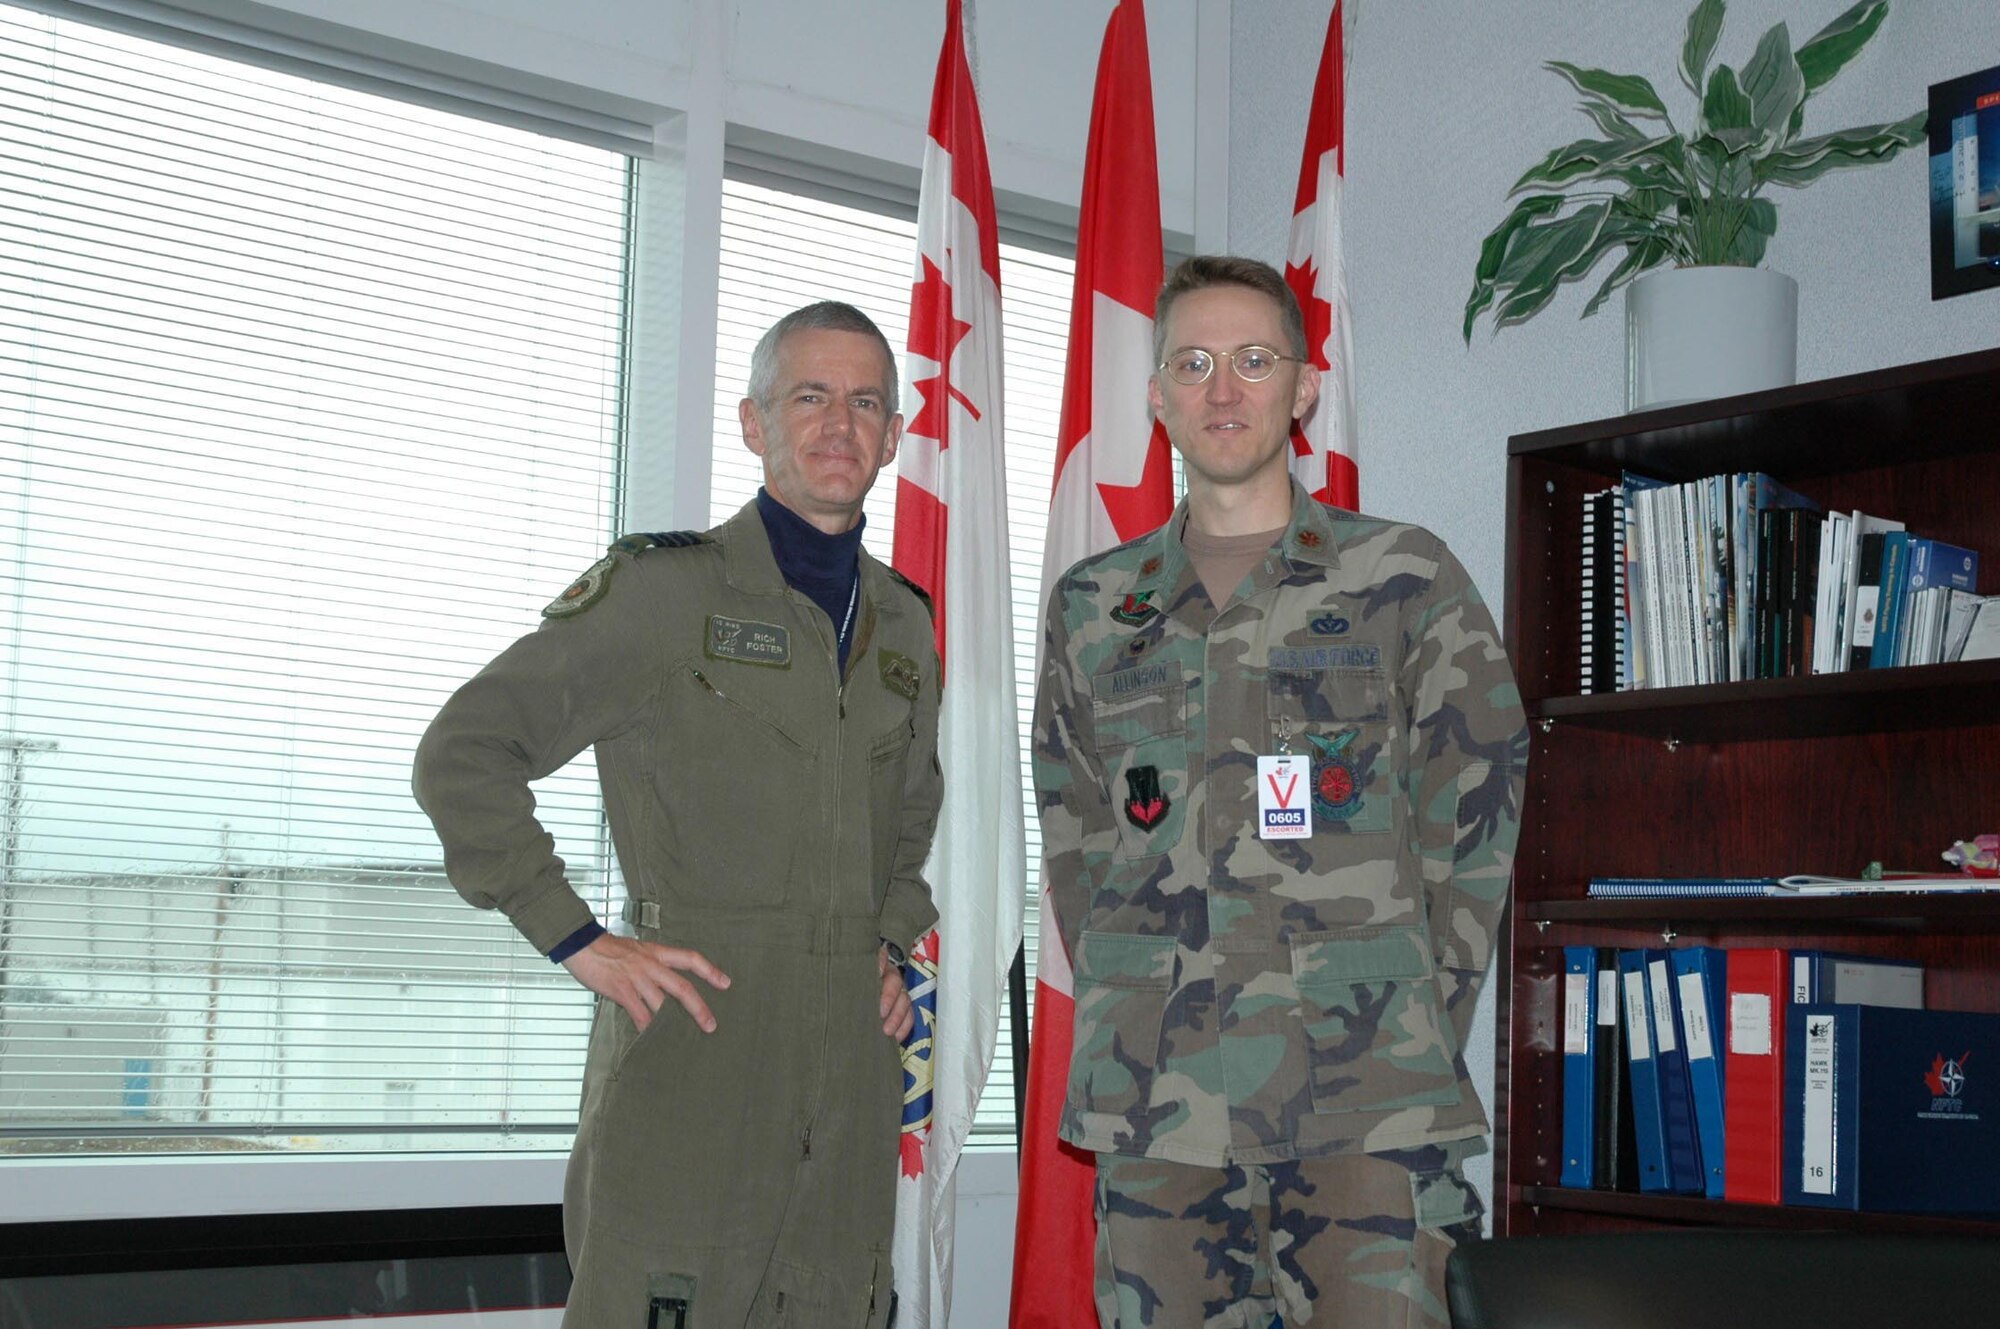 Canadian Colonel R.D. Foster, commander of 15th Wing, Moose Jaw, meets with Major Matthew Allison, 147th Civil Engineer Squadron commander. (Texas National Guard photo/Senior Master Sgt. Marcus Falleaf)